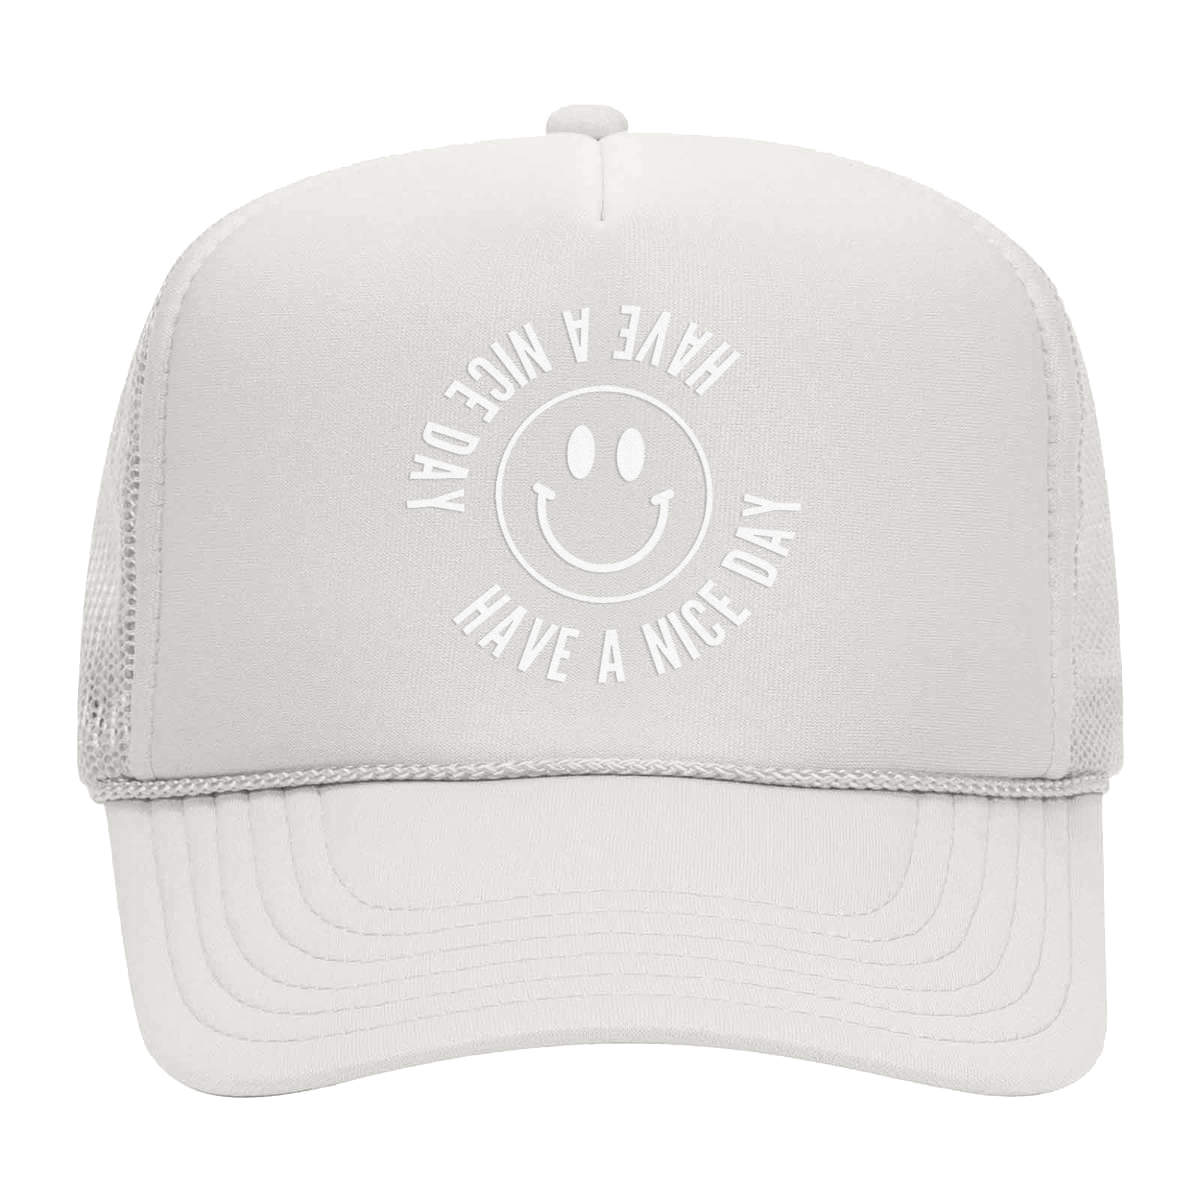 Smile Have a Nice Day Foam Snapback